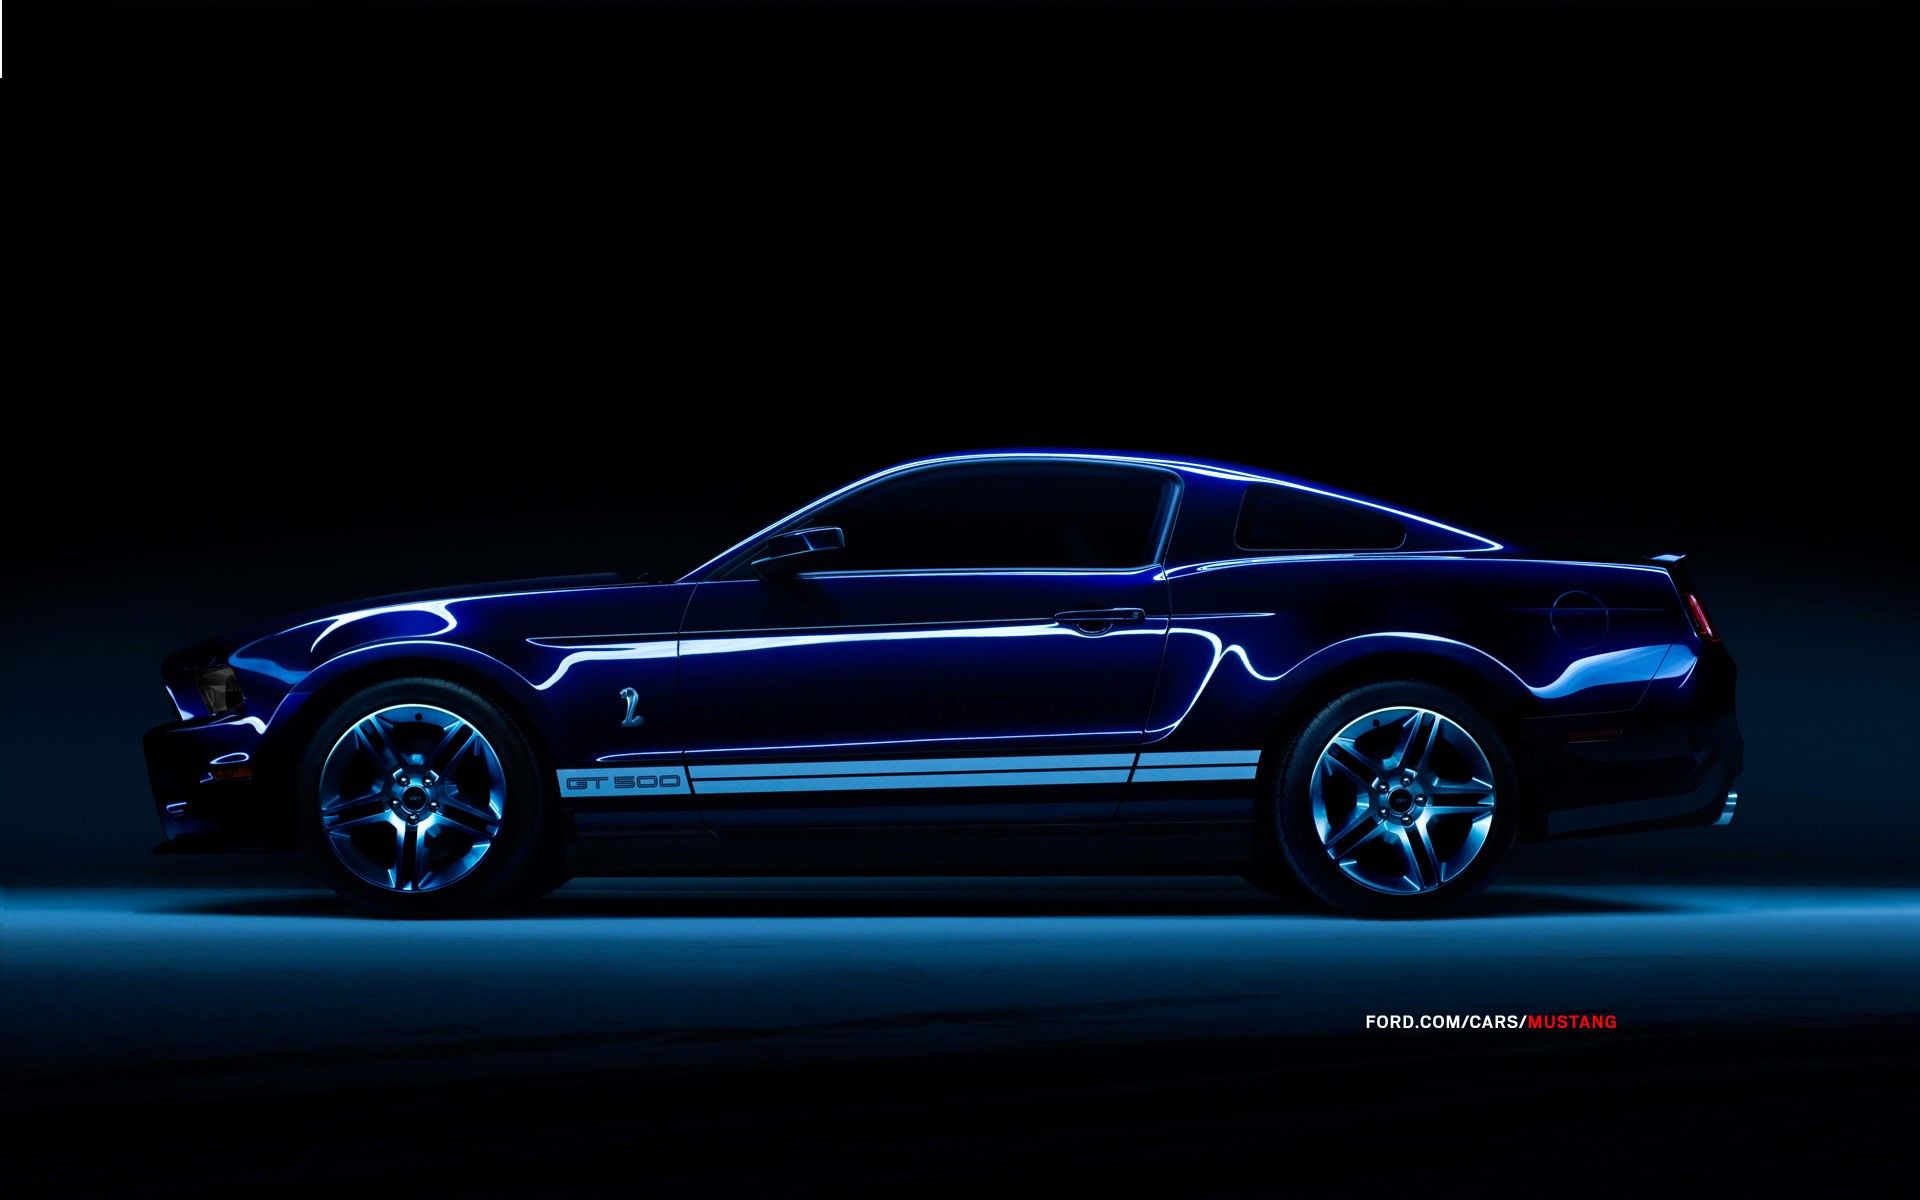 Free download Ford Mustang Shelby GT500 Computer Wallpaper